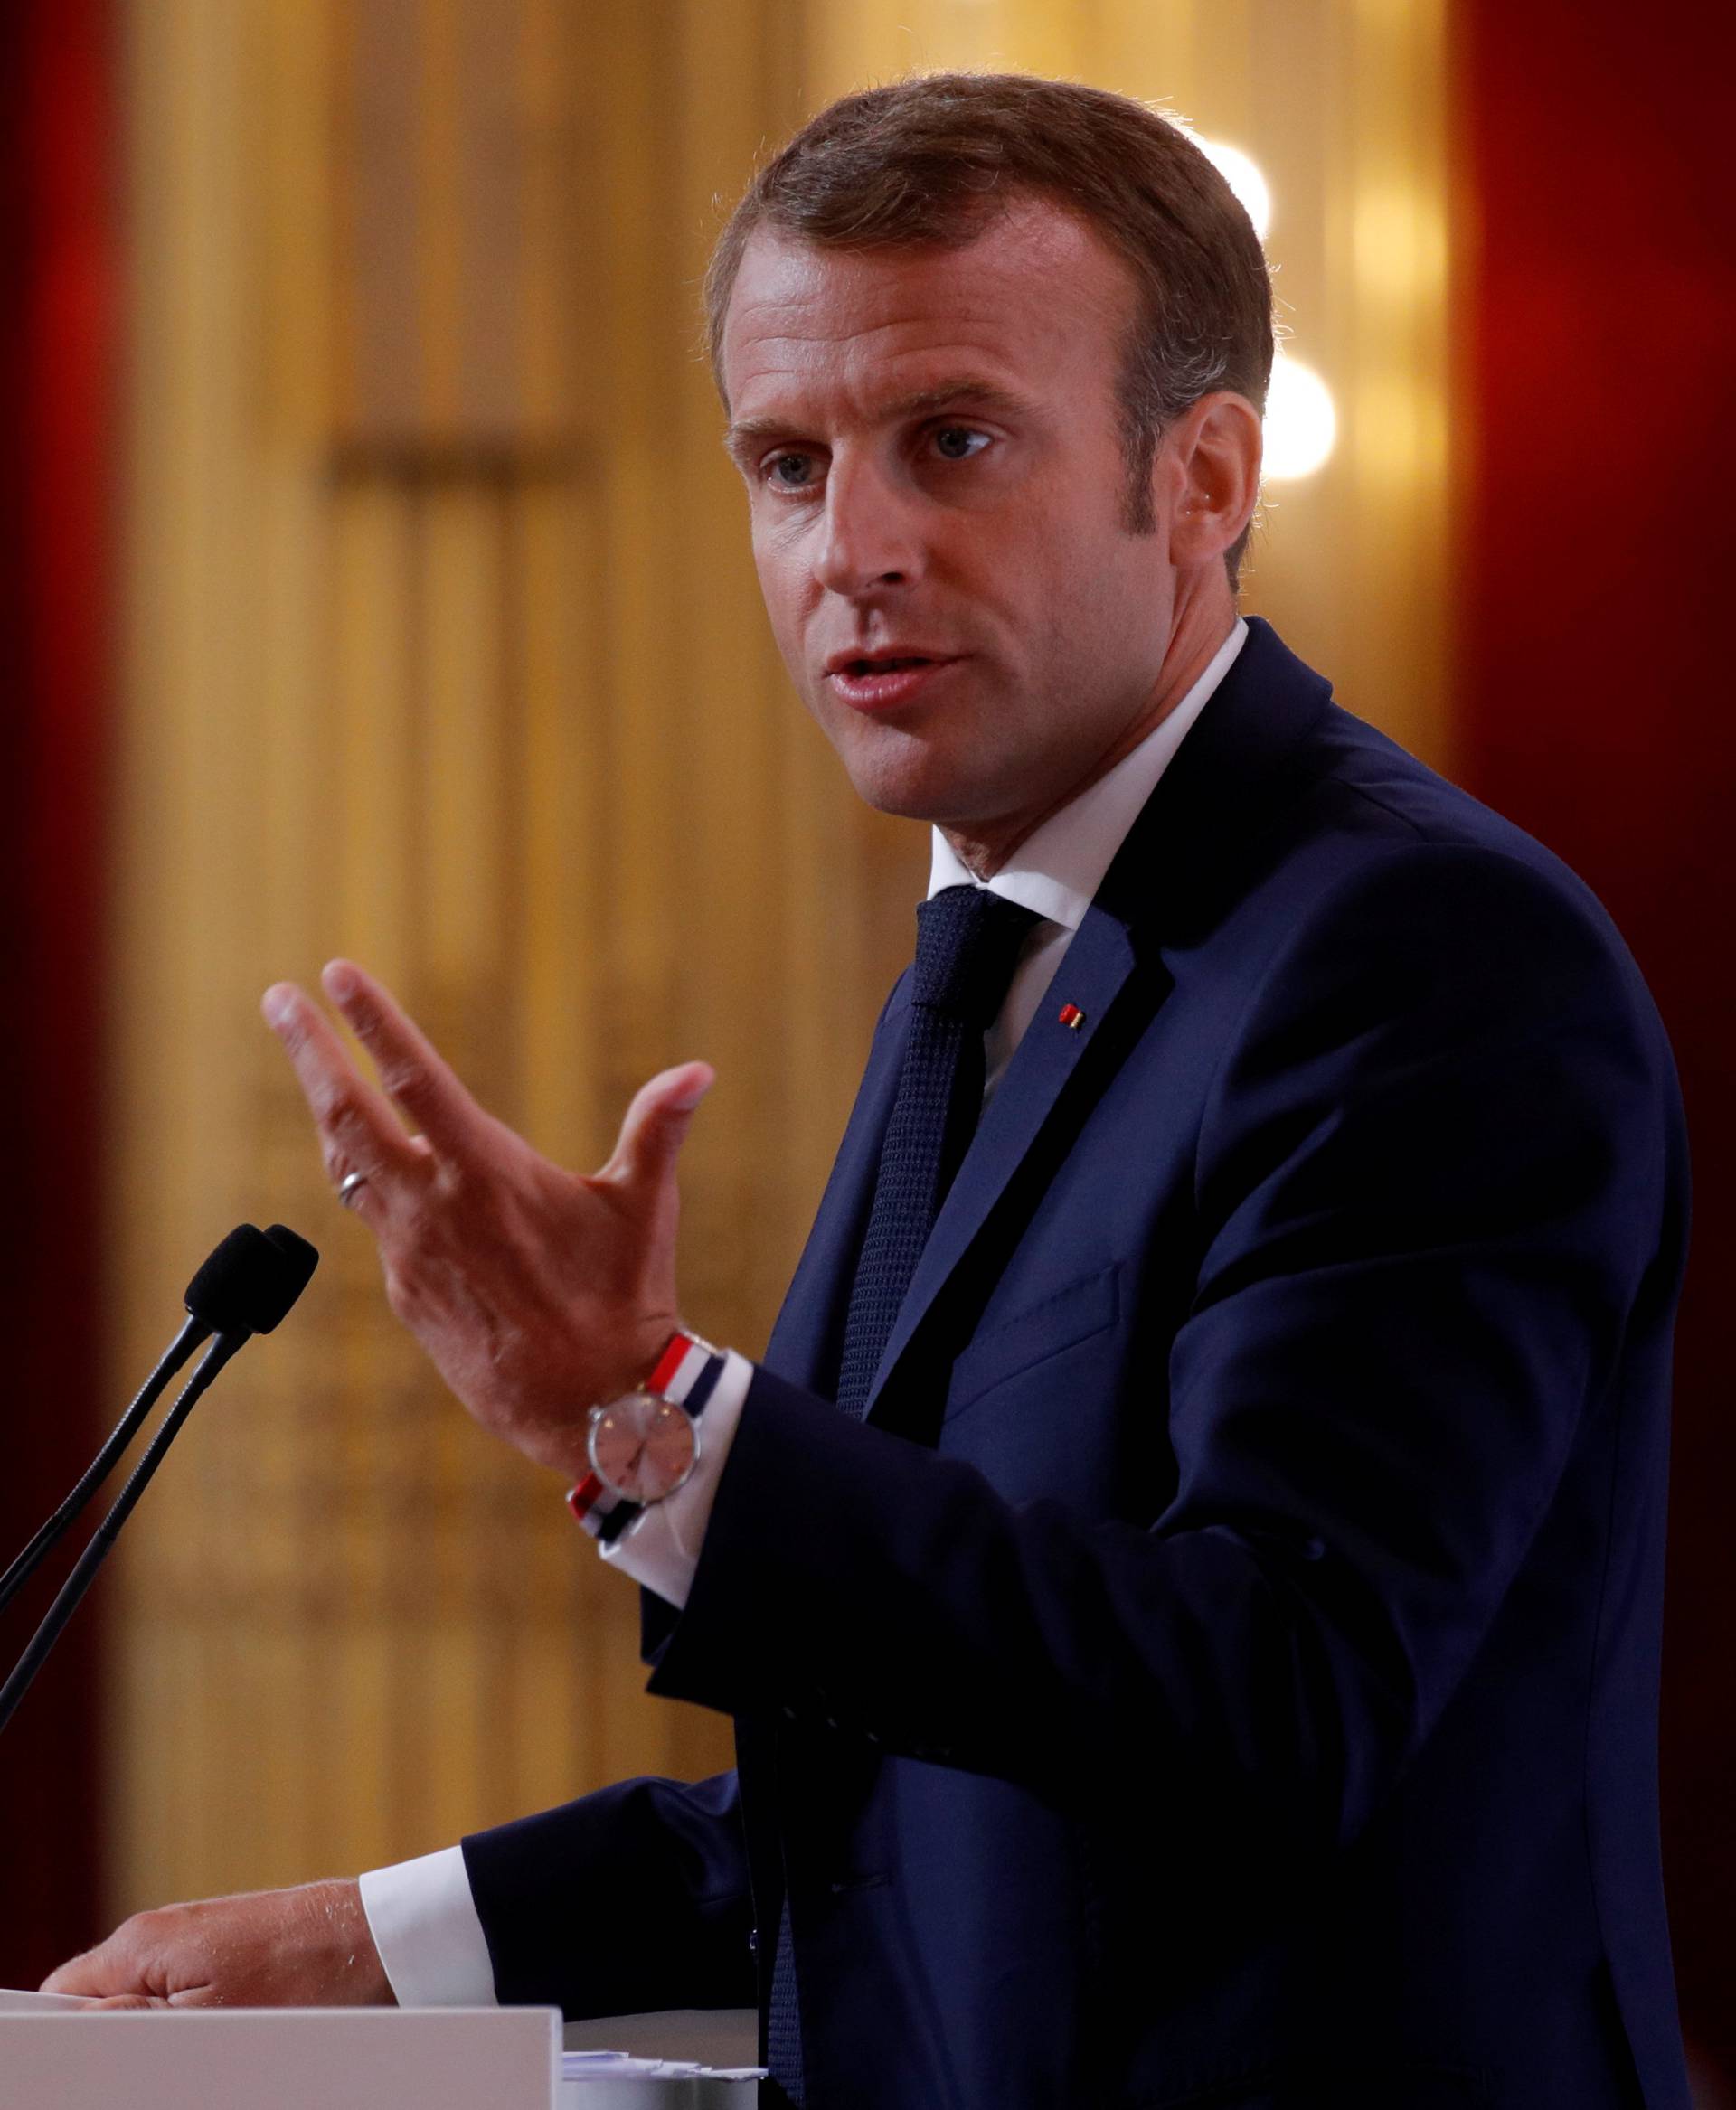 French President Emmanuel Macron delivers a speech during the annual French ambassadors' conference at the Elysee Palace in Paris